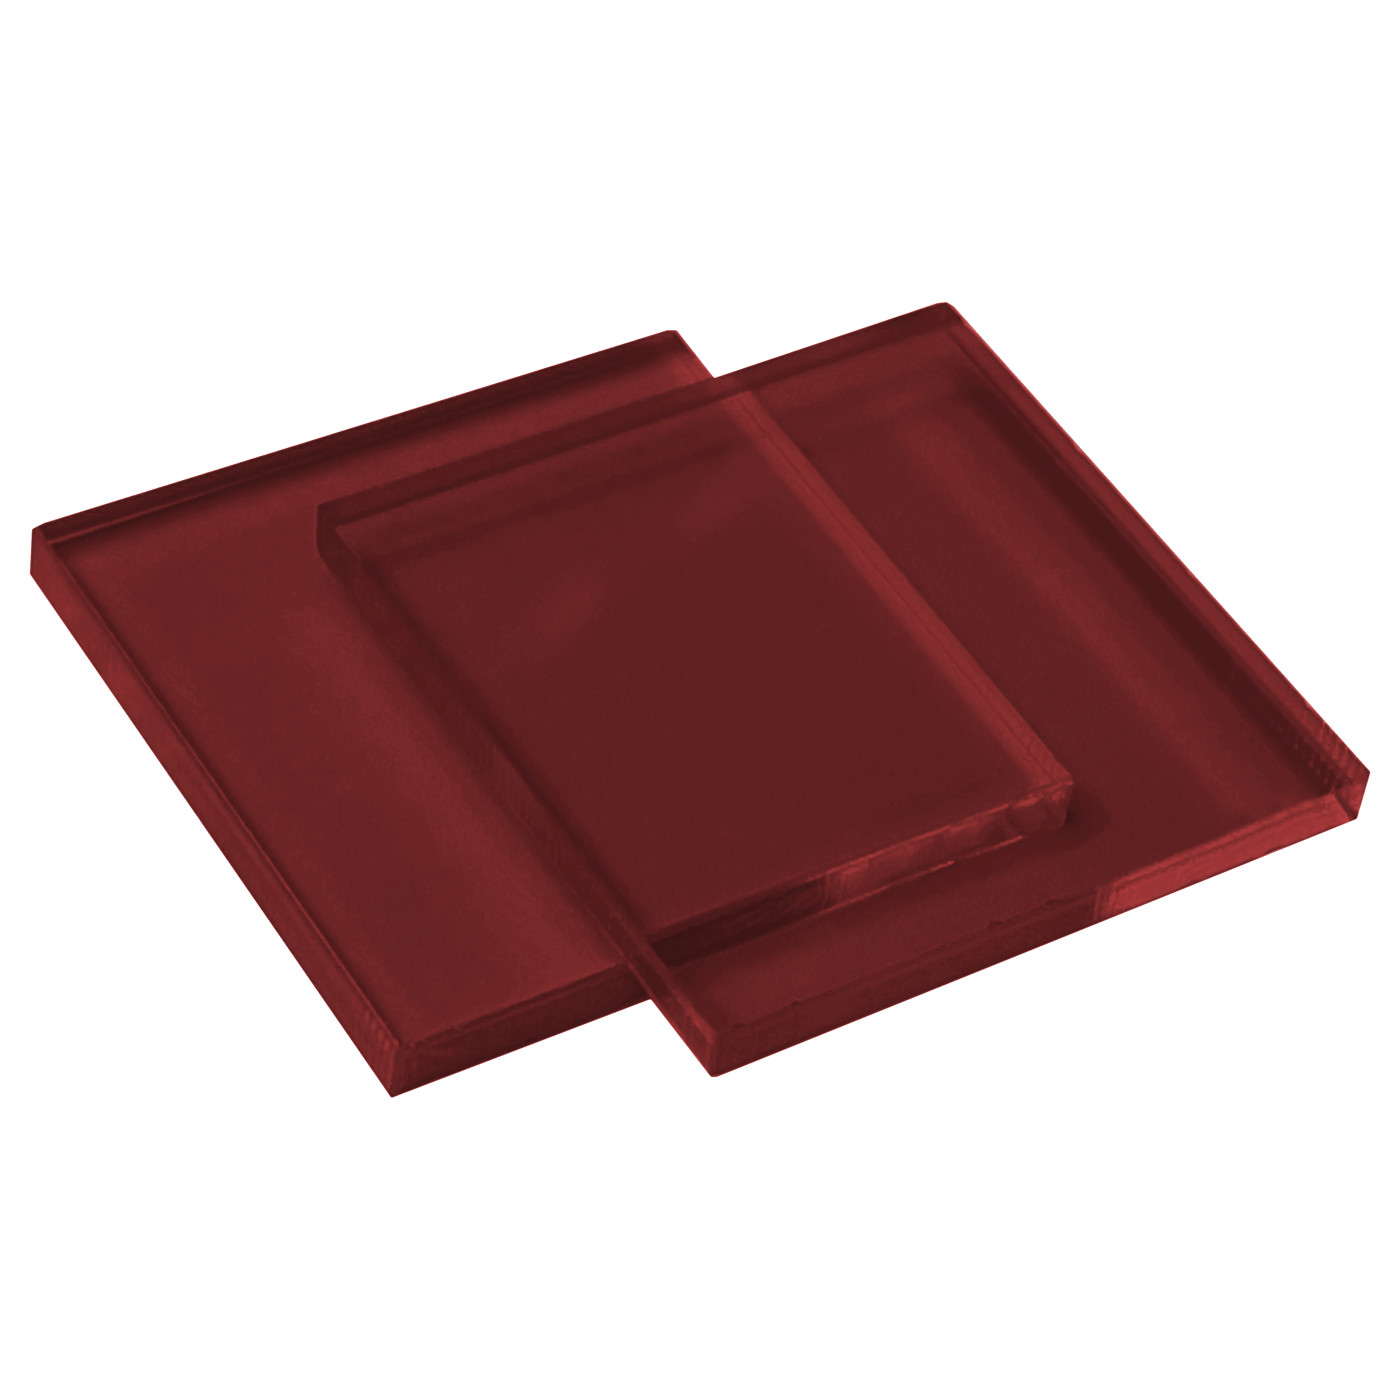 Set of 30 plastic squares (3x30x30 mm, acrylic, PMMA, red